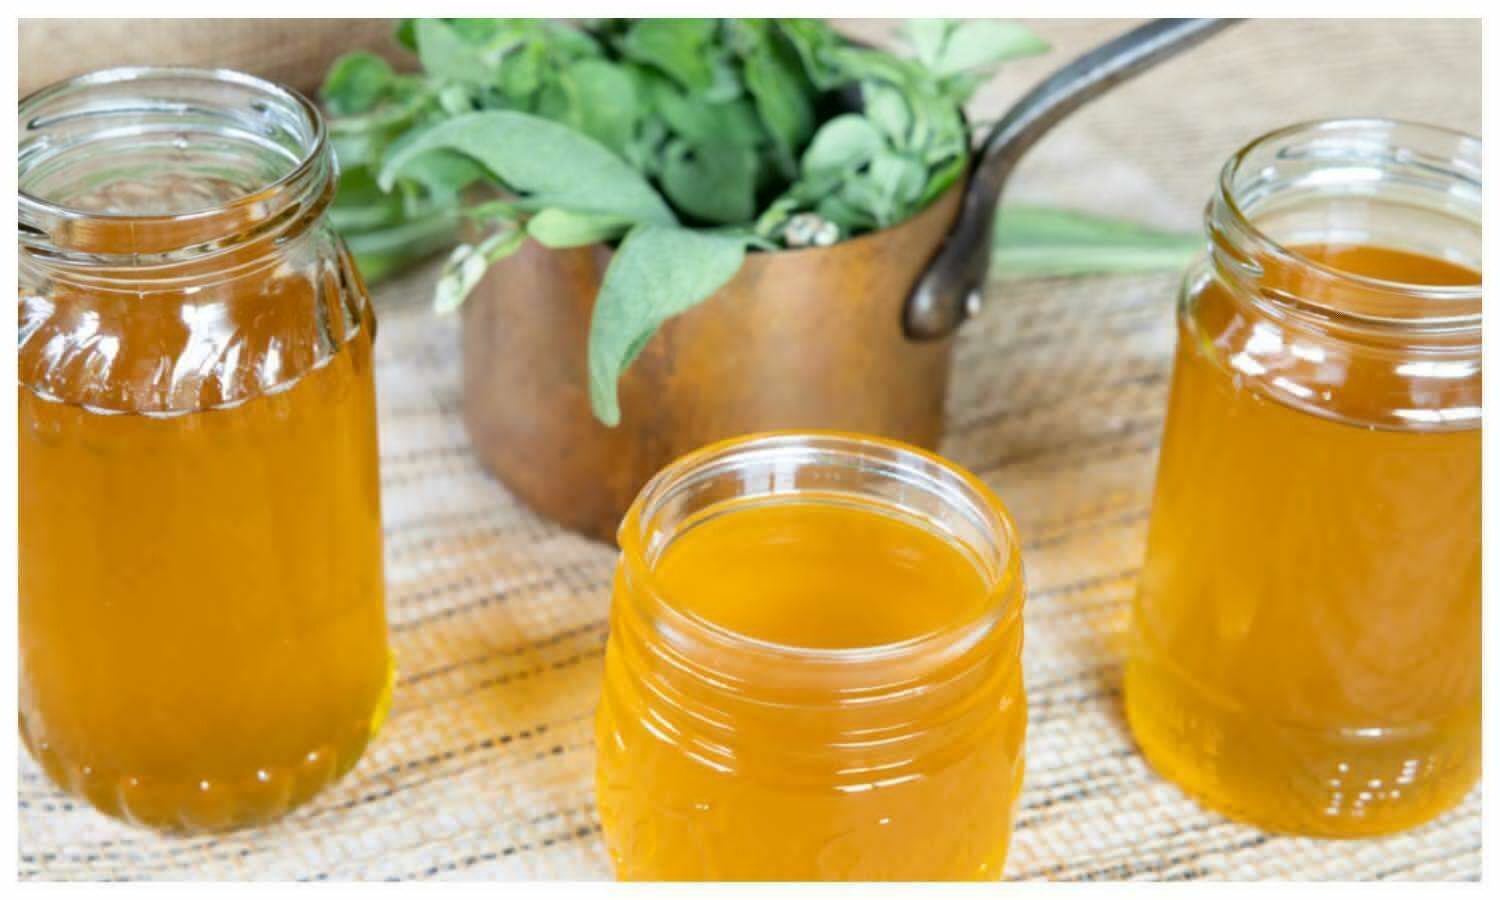 Ghee Aur Neem Khane Ke Fayde: Combination of ghee and neem controls high blood sugar, also cures many other diseases